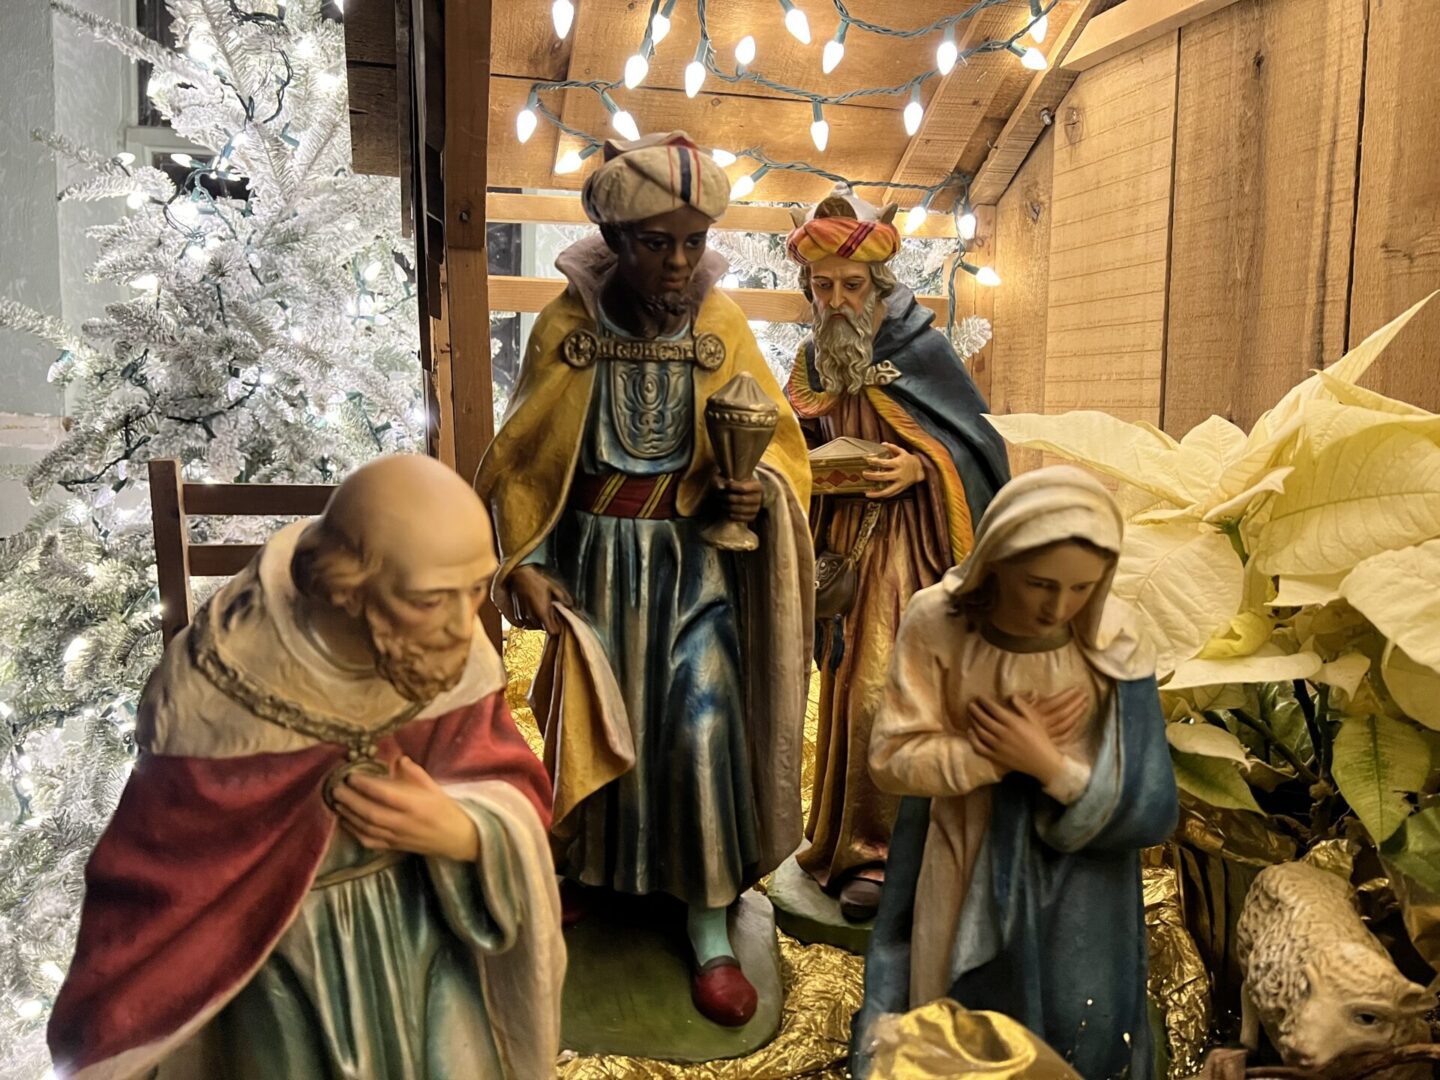 A nativity scene with three kings and one baby jesus.